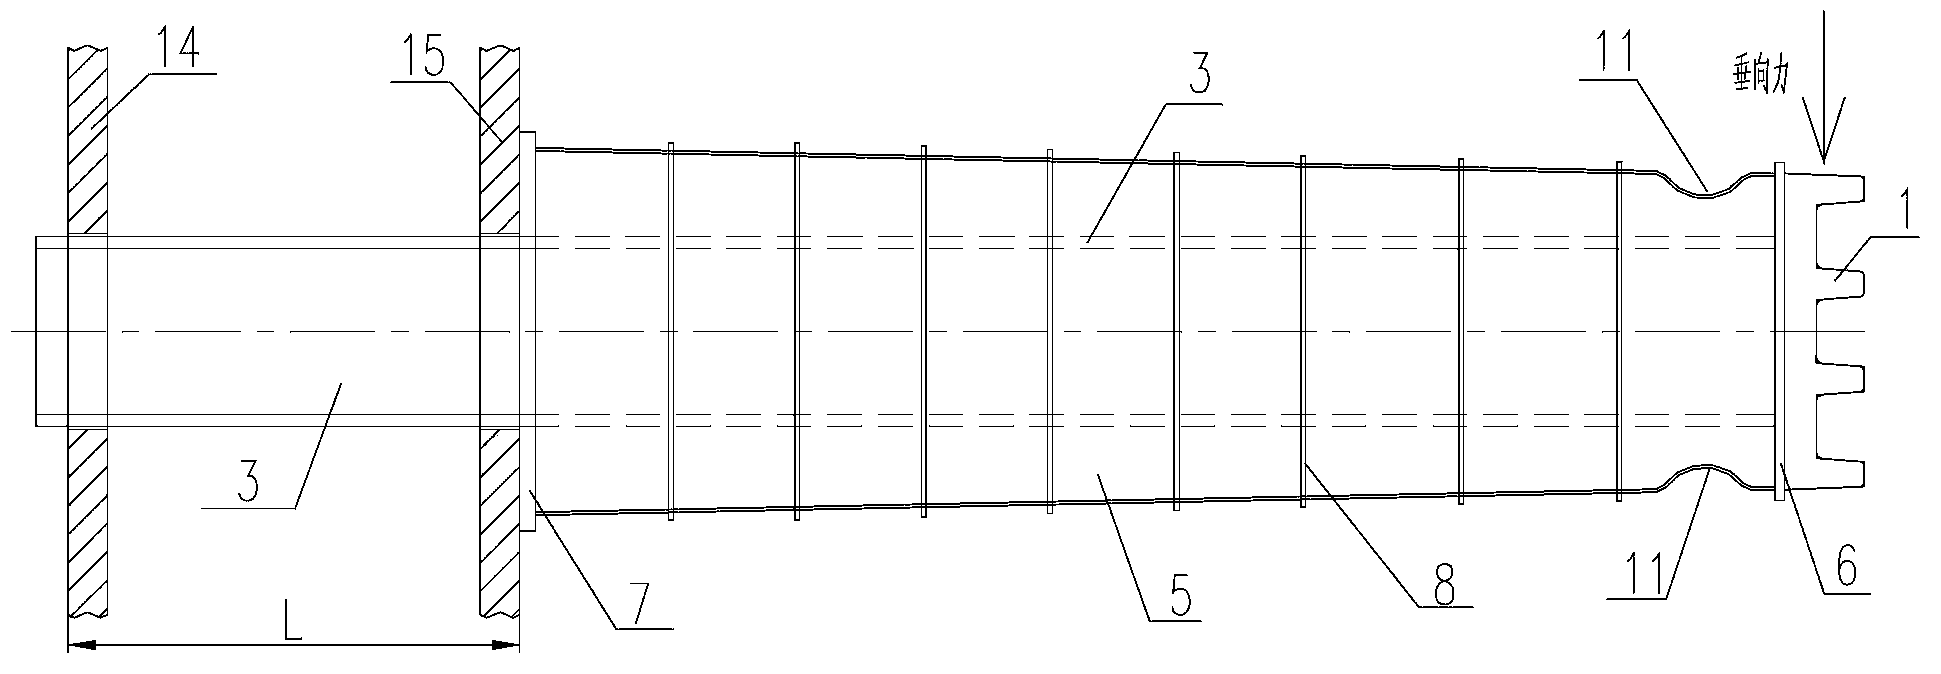 Anti-creeping energy absorption device for railway vehicle